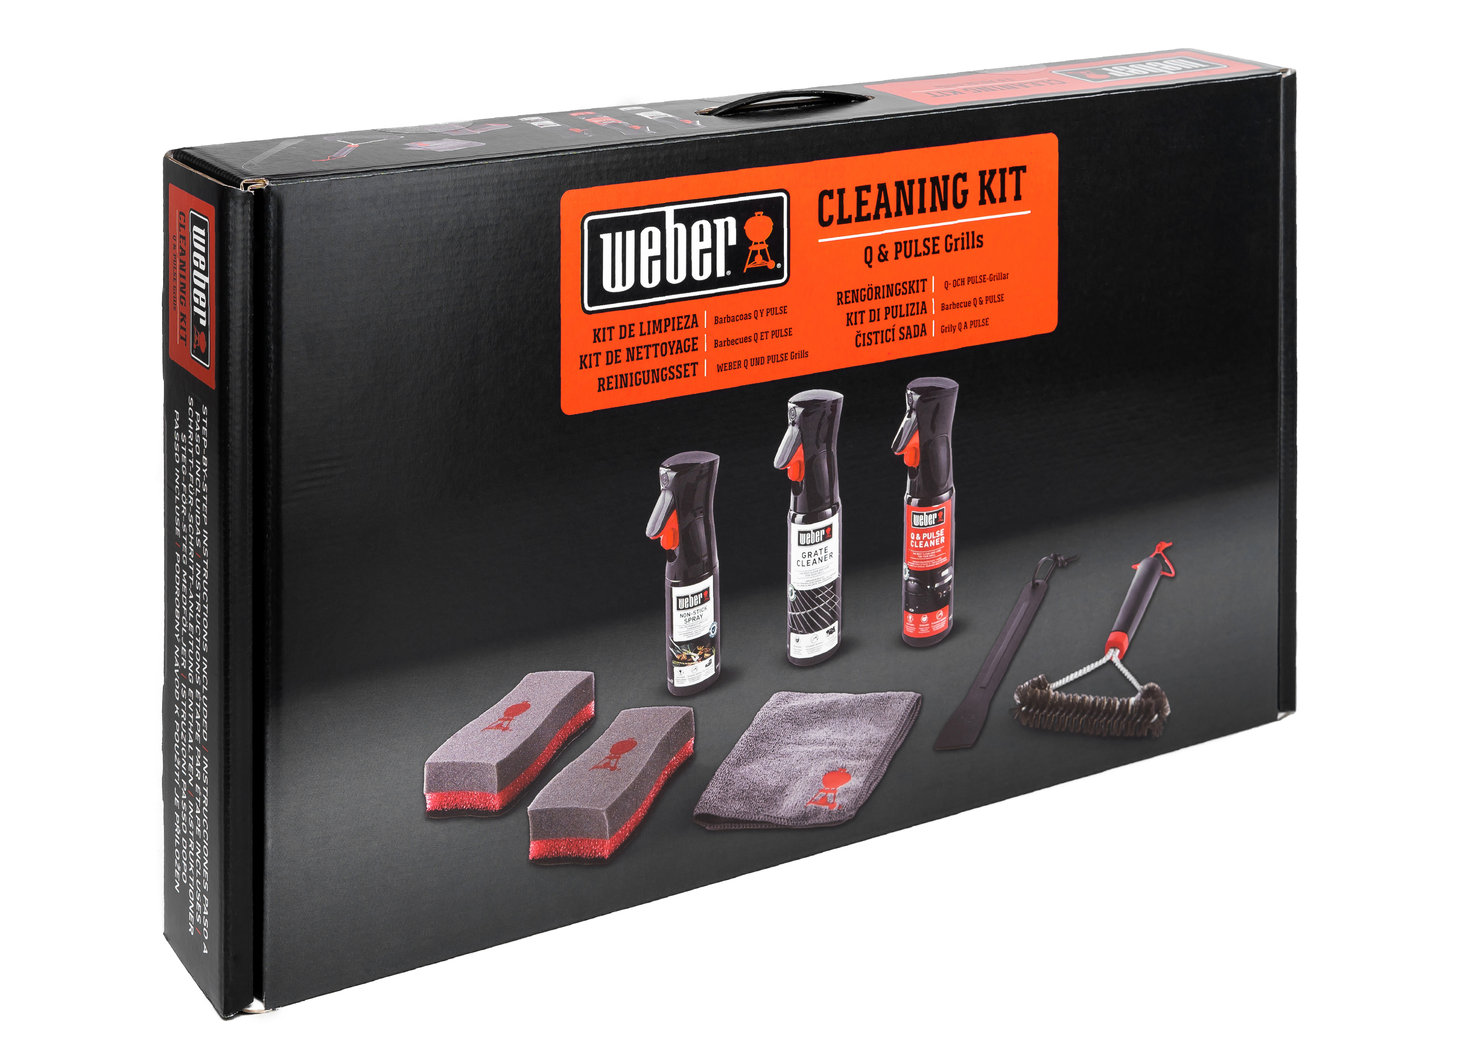 Charcoal grill cleaning kit